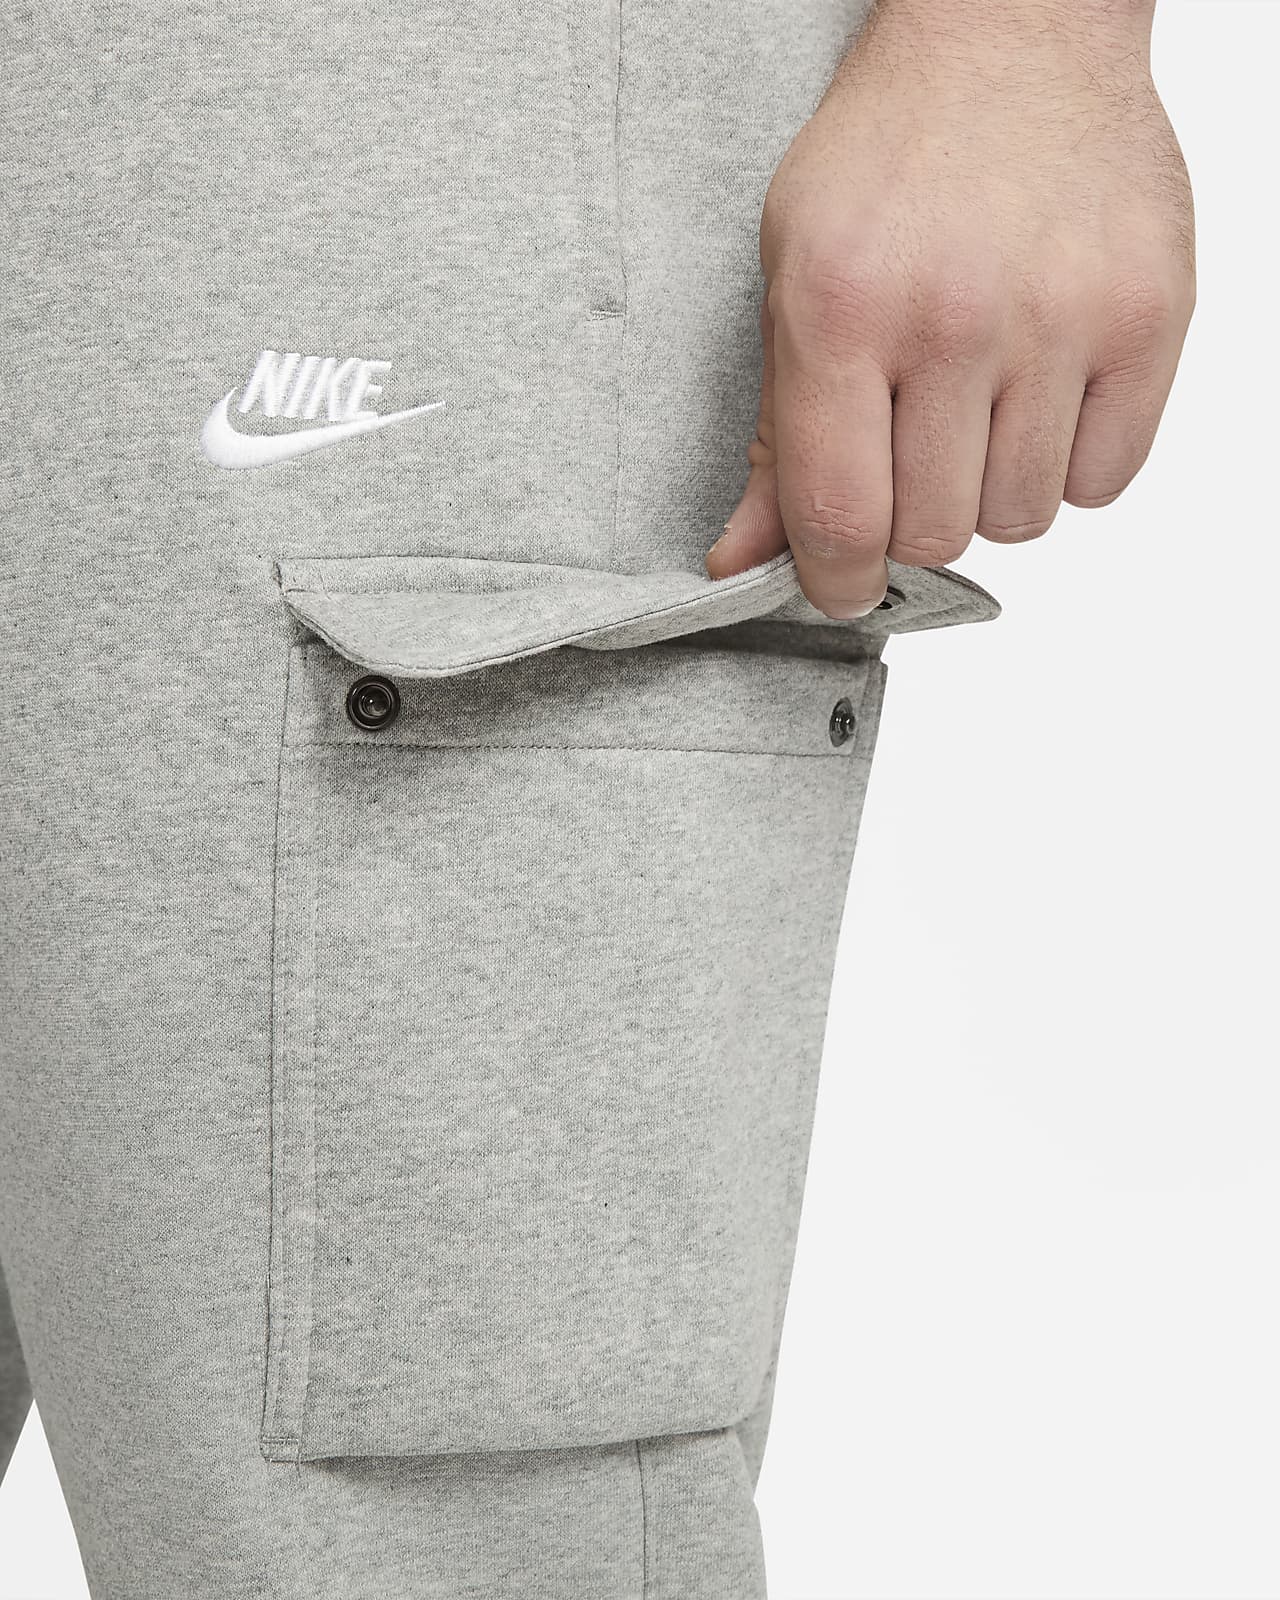  Nike Mens NSW Club Pant Cargo BB Mens CD3129-410 Size S :  Clothing, Shoes & Jewelry